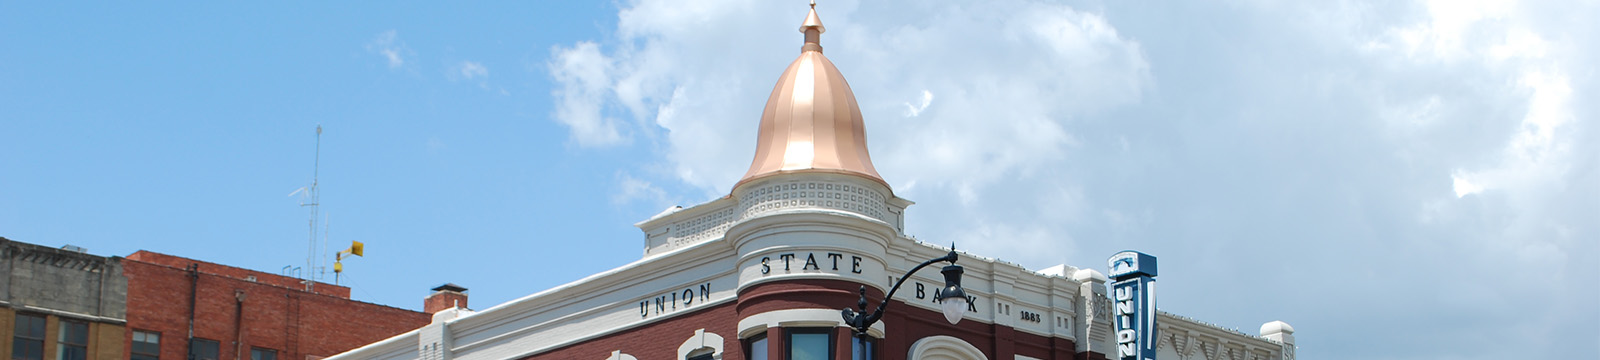 Photo of the top section of the Union State Bank building located in downtown Arkansas City